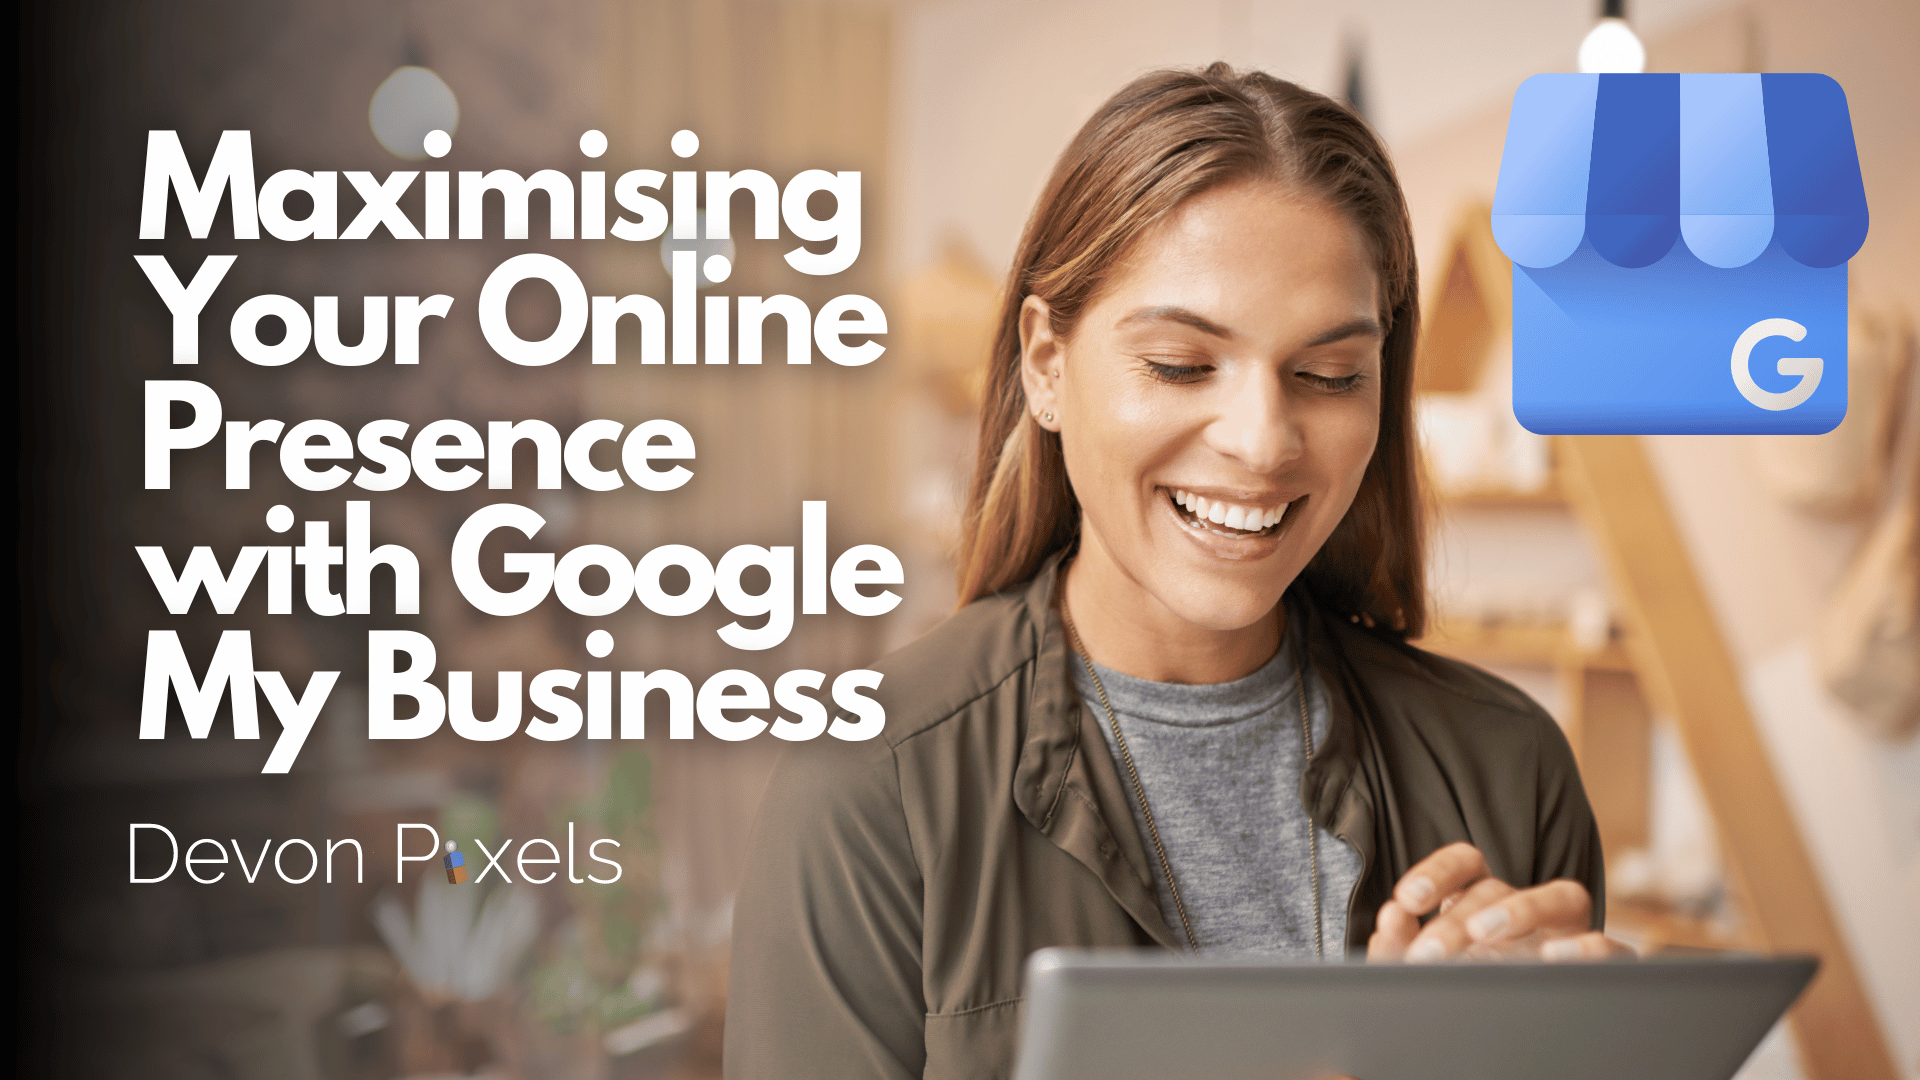 Maximising Your Online Presence with Google My Business